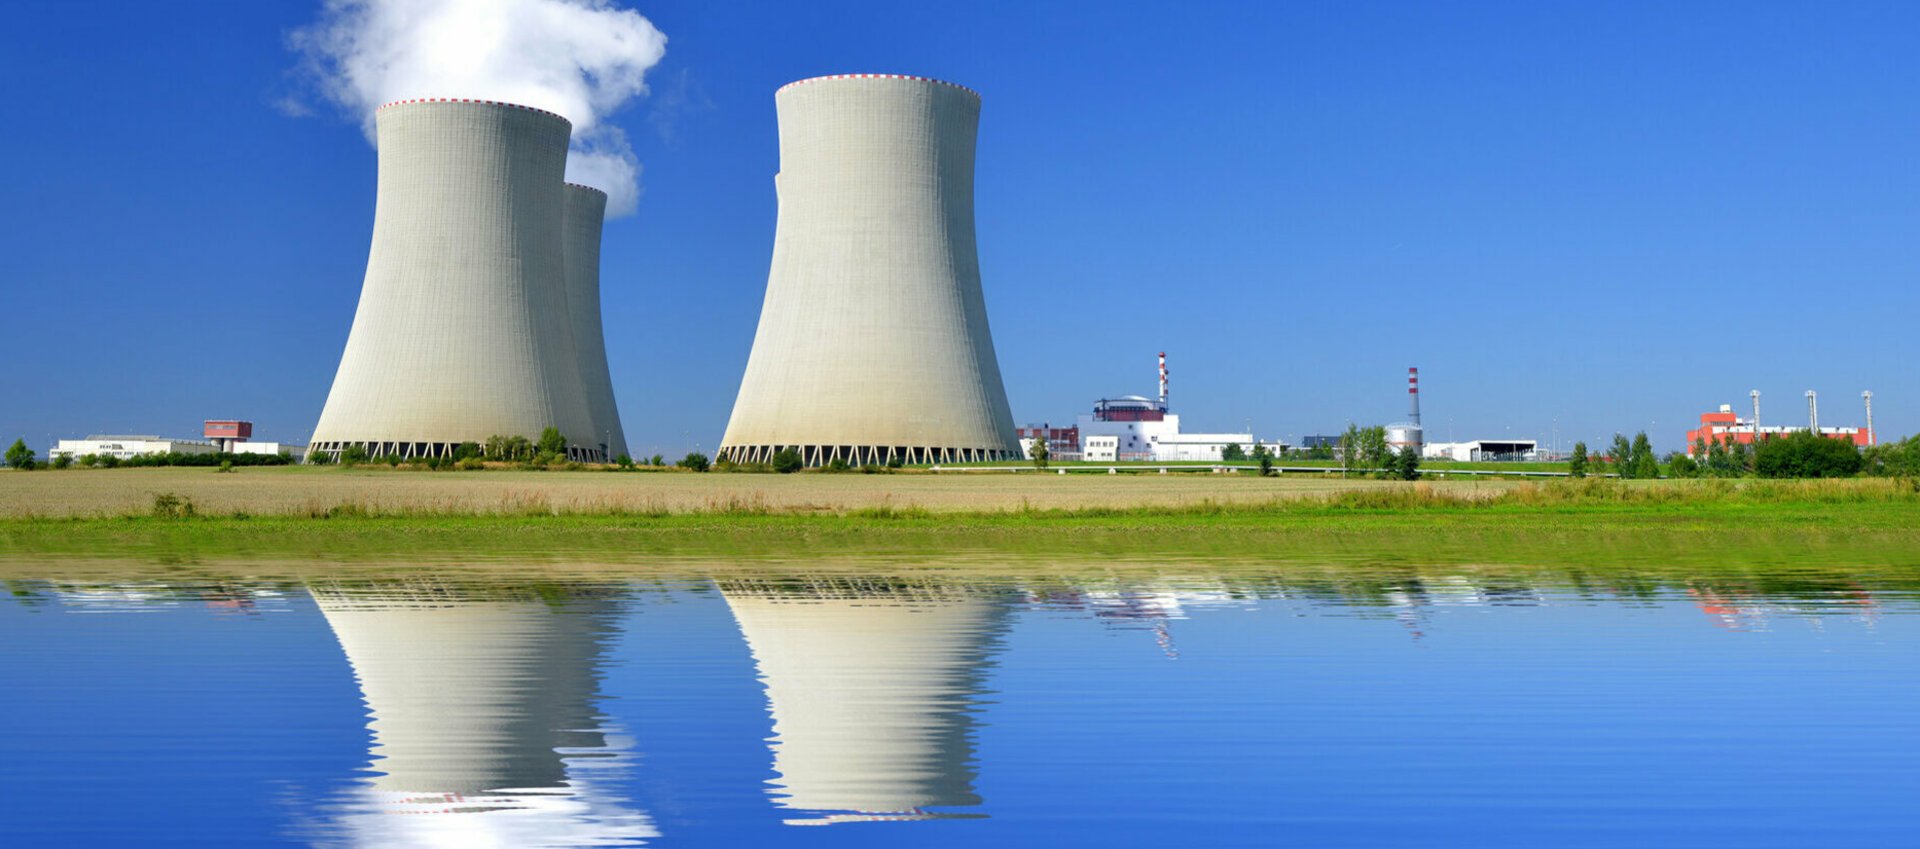 NQSA promotes the use of the ISO 19443 standard to improve nuclear safety